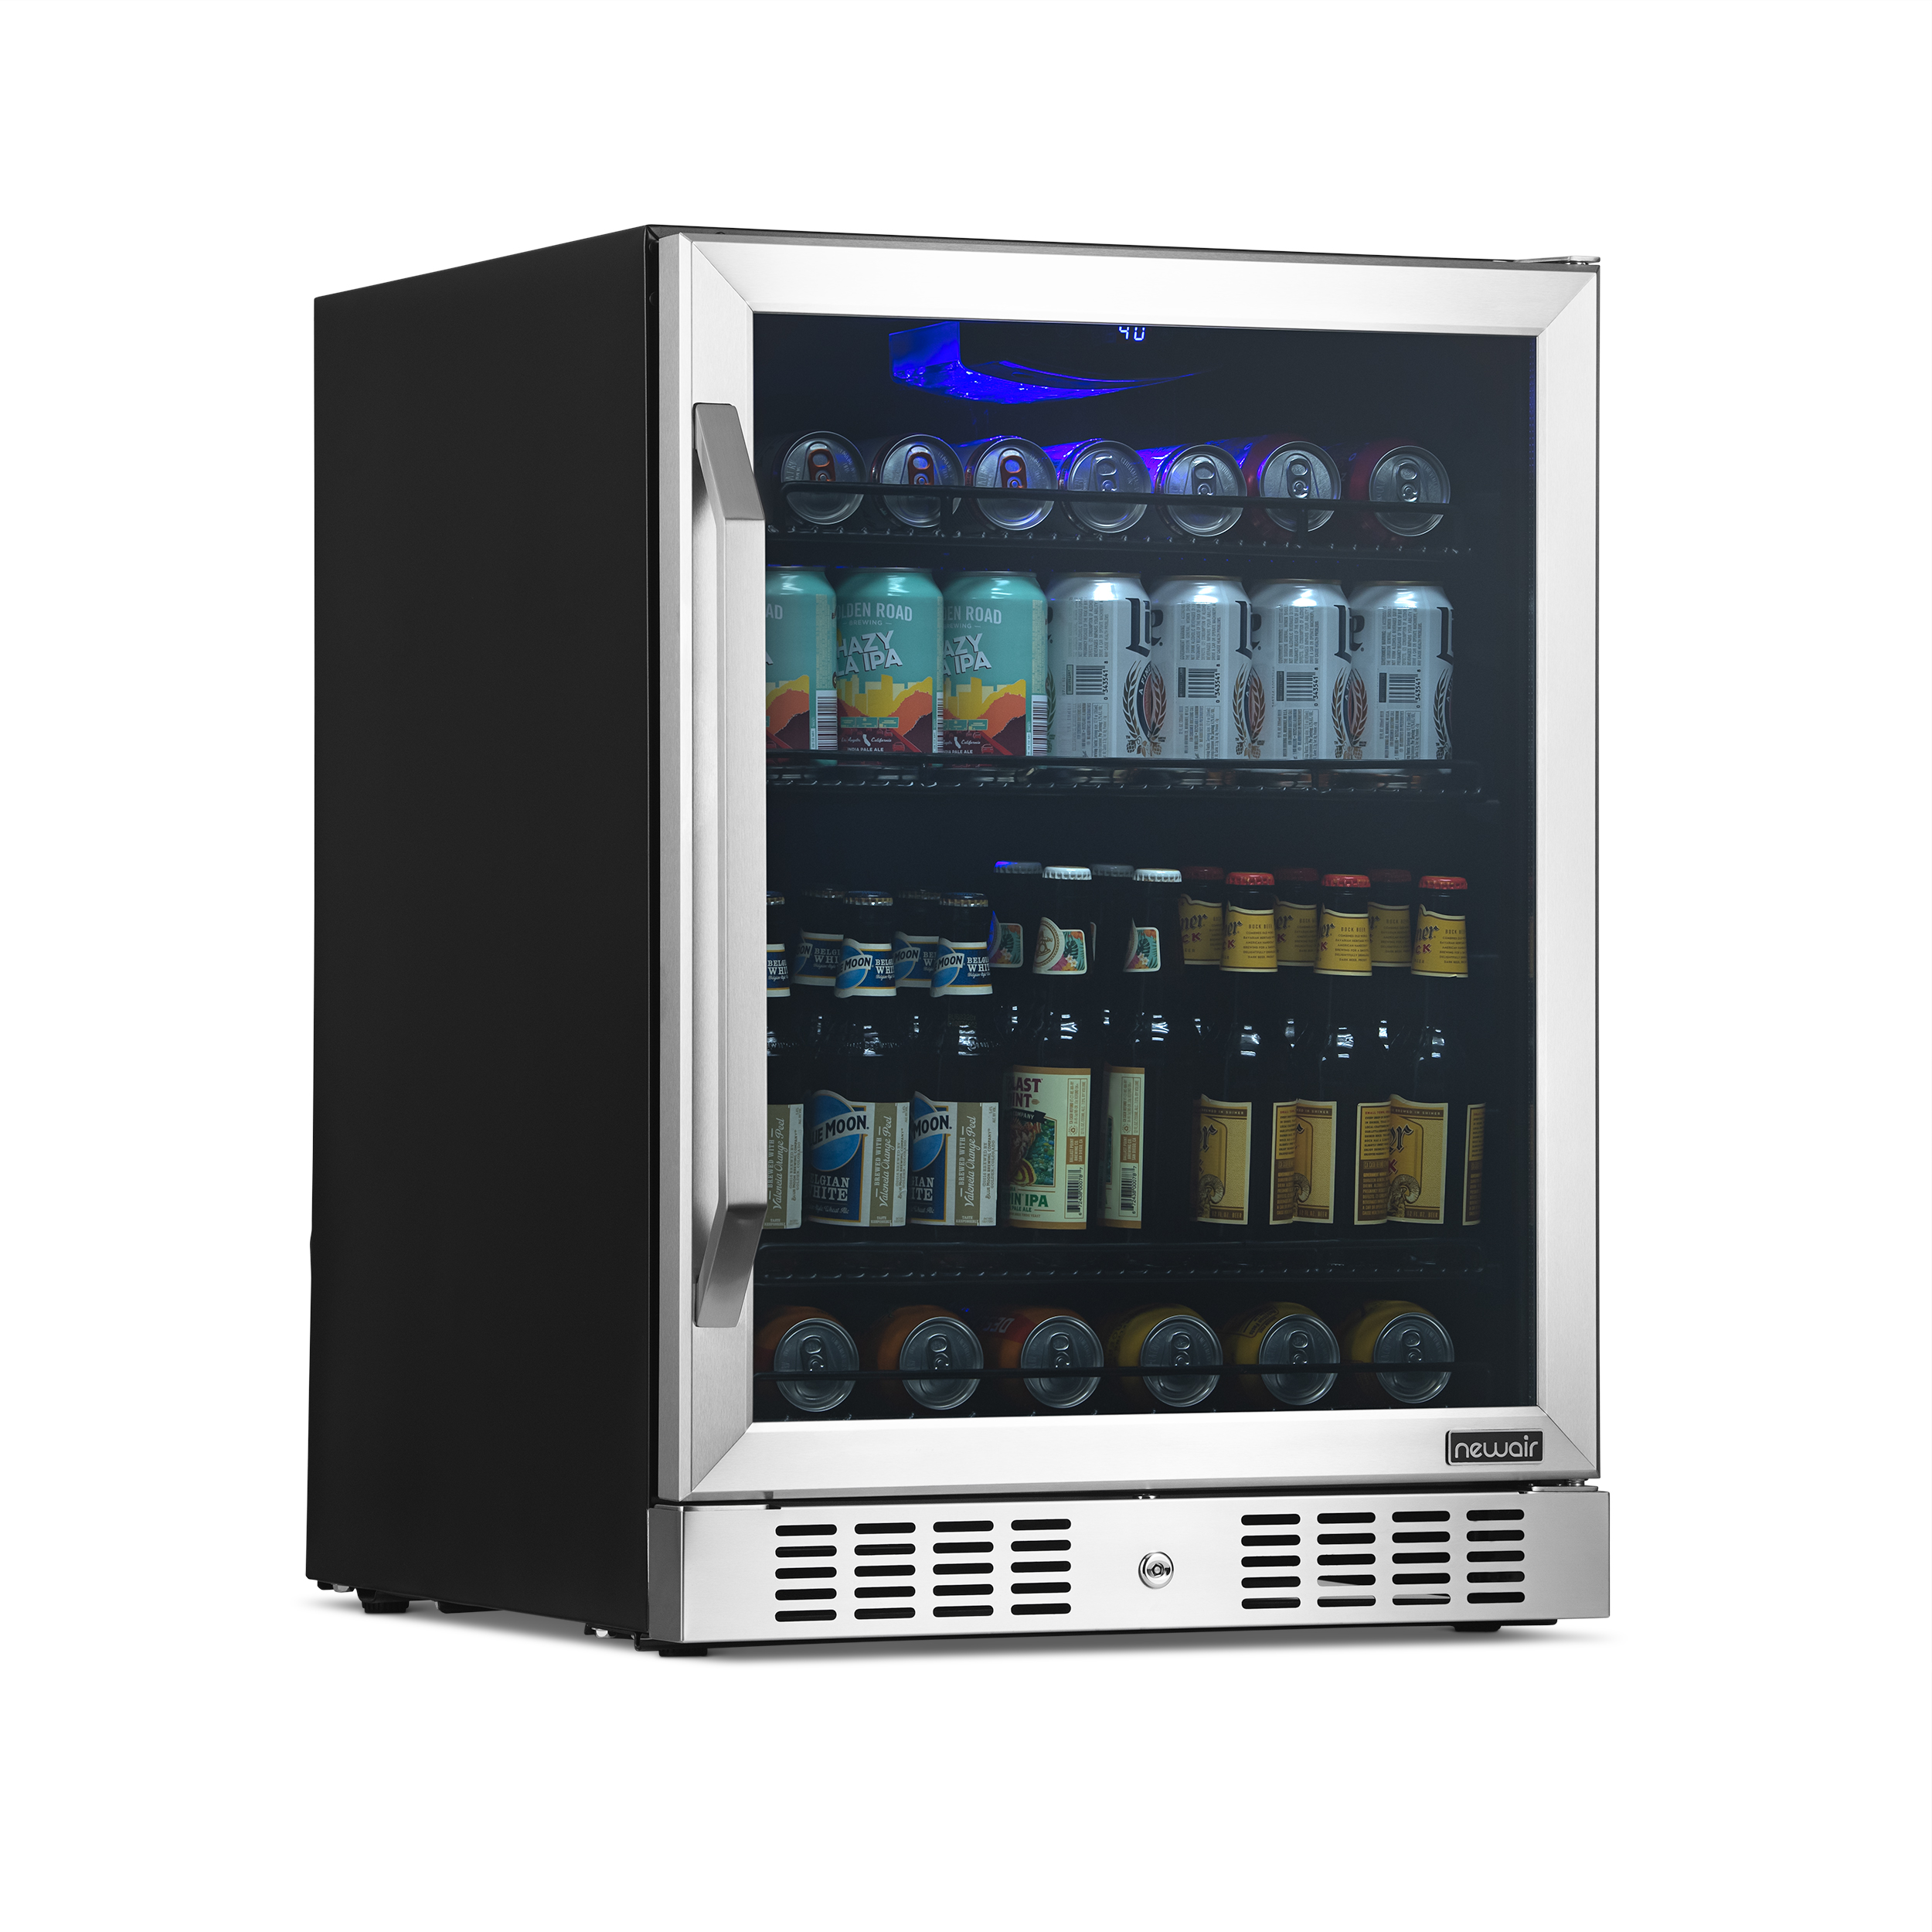 NewAir 24” Built-in or Freestanding 177 Can Beverage Fridge in Stainless Steel with Precision Digital Thermostat, Adjustable Shelves, and Triple-Pane Glass - image 1 of 13